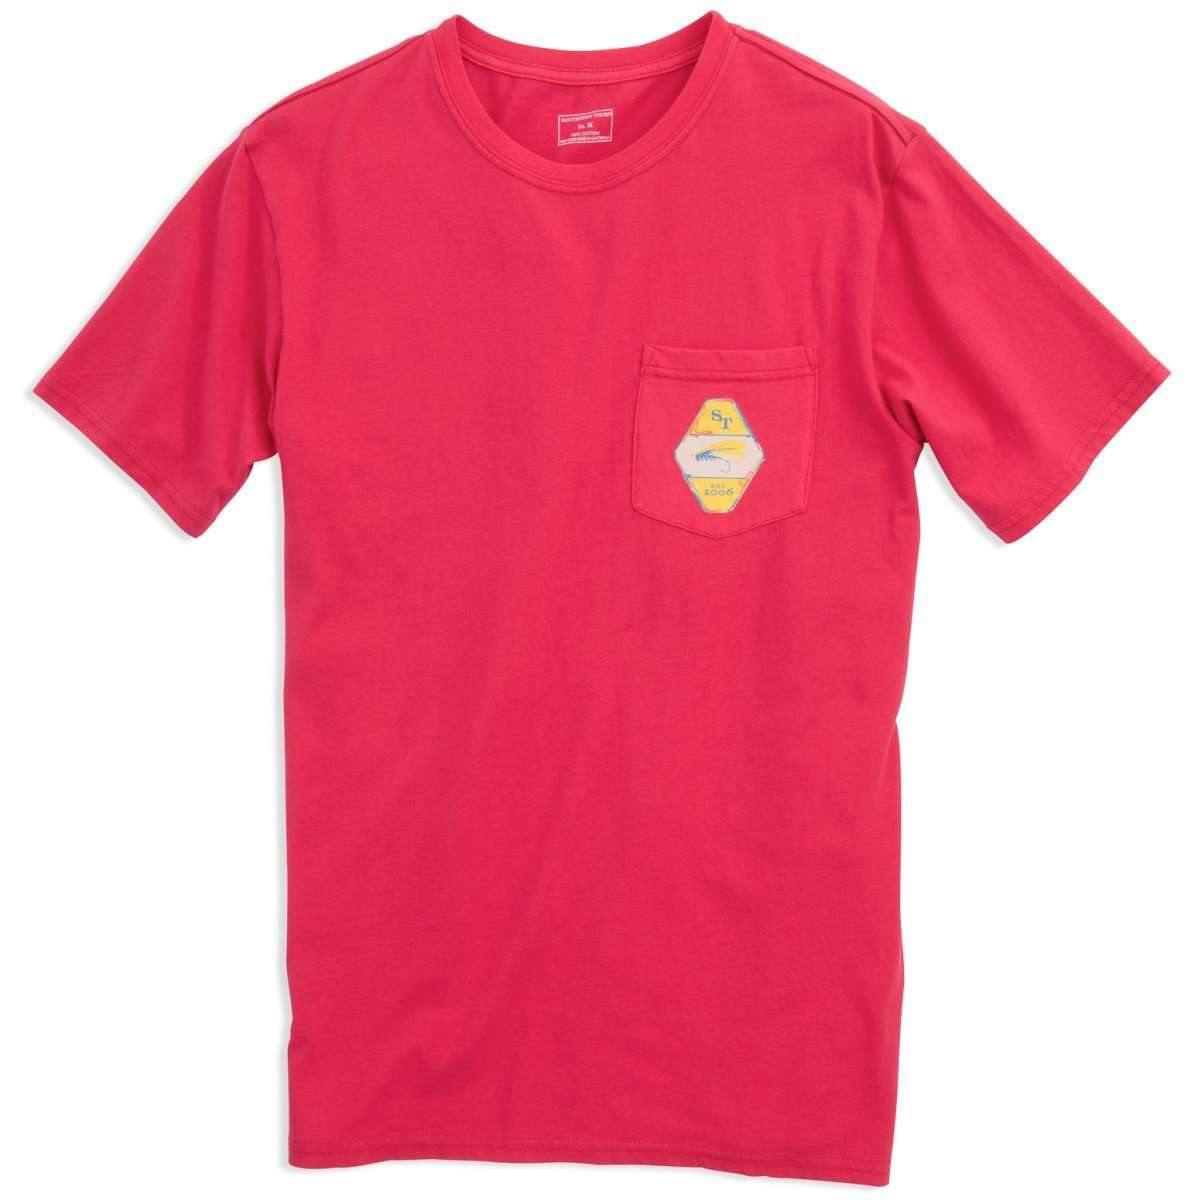 The Reel Deal Tee-Shirt in Portside Red by Southern Tide - Country Club Prep